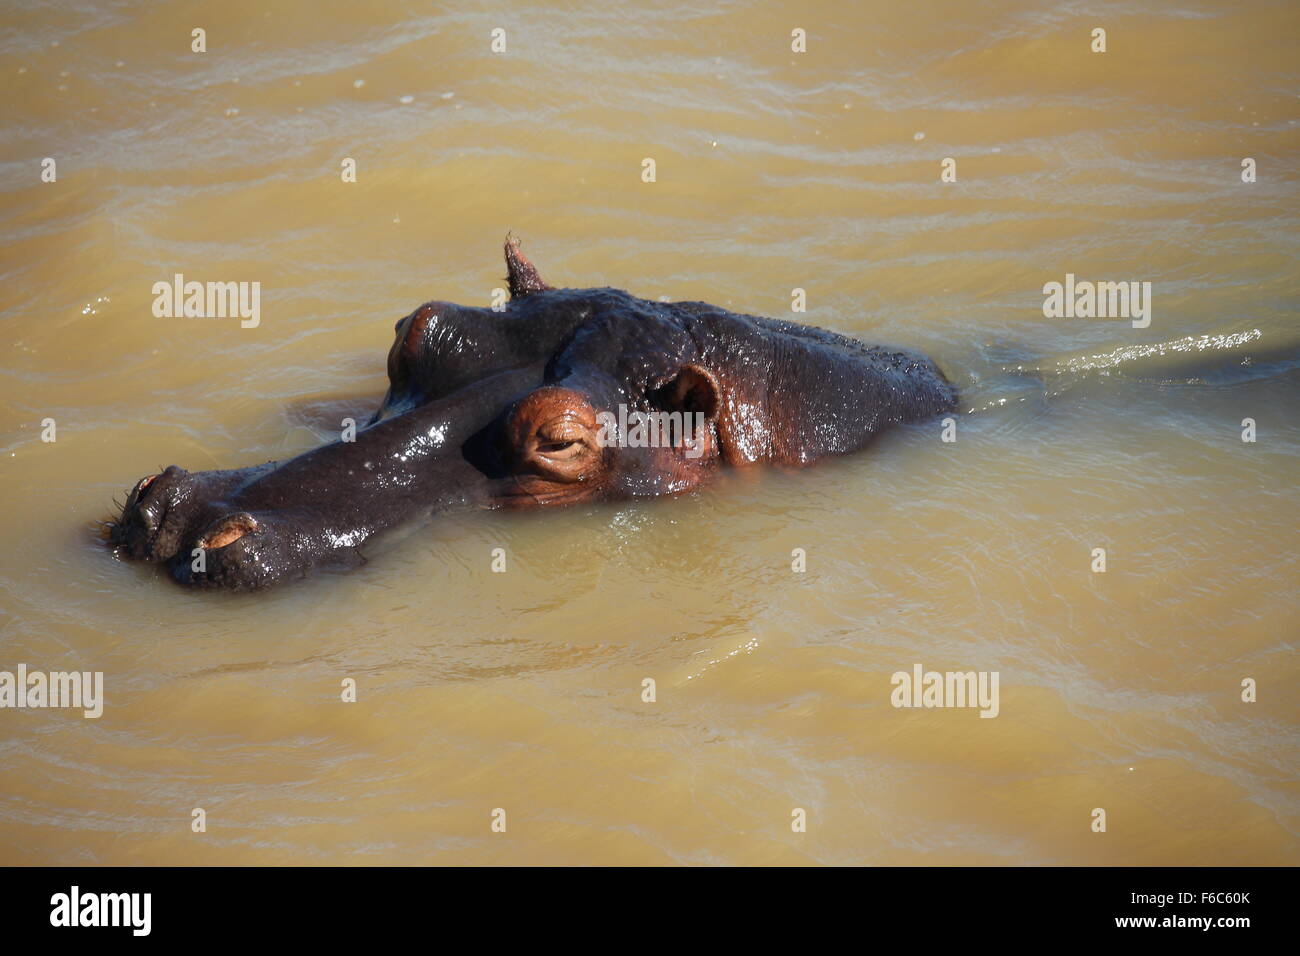 Hippo in lake, st. Lucia, South Africa Stock Photo